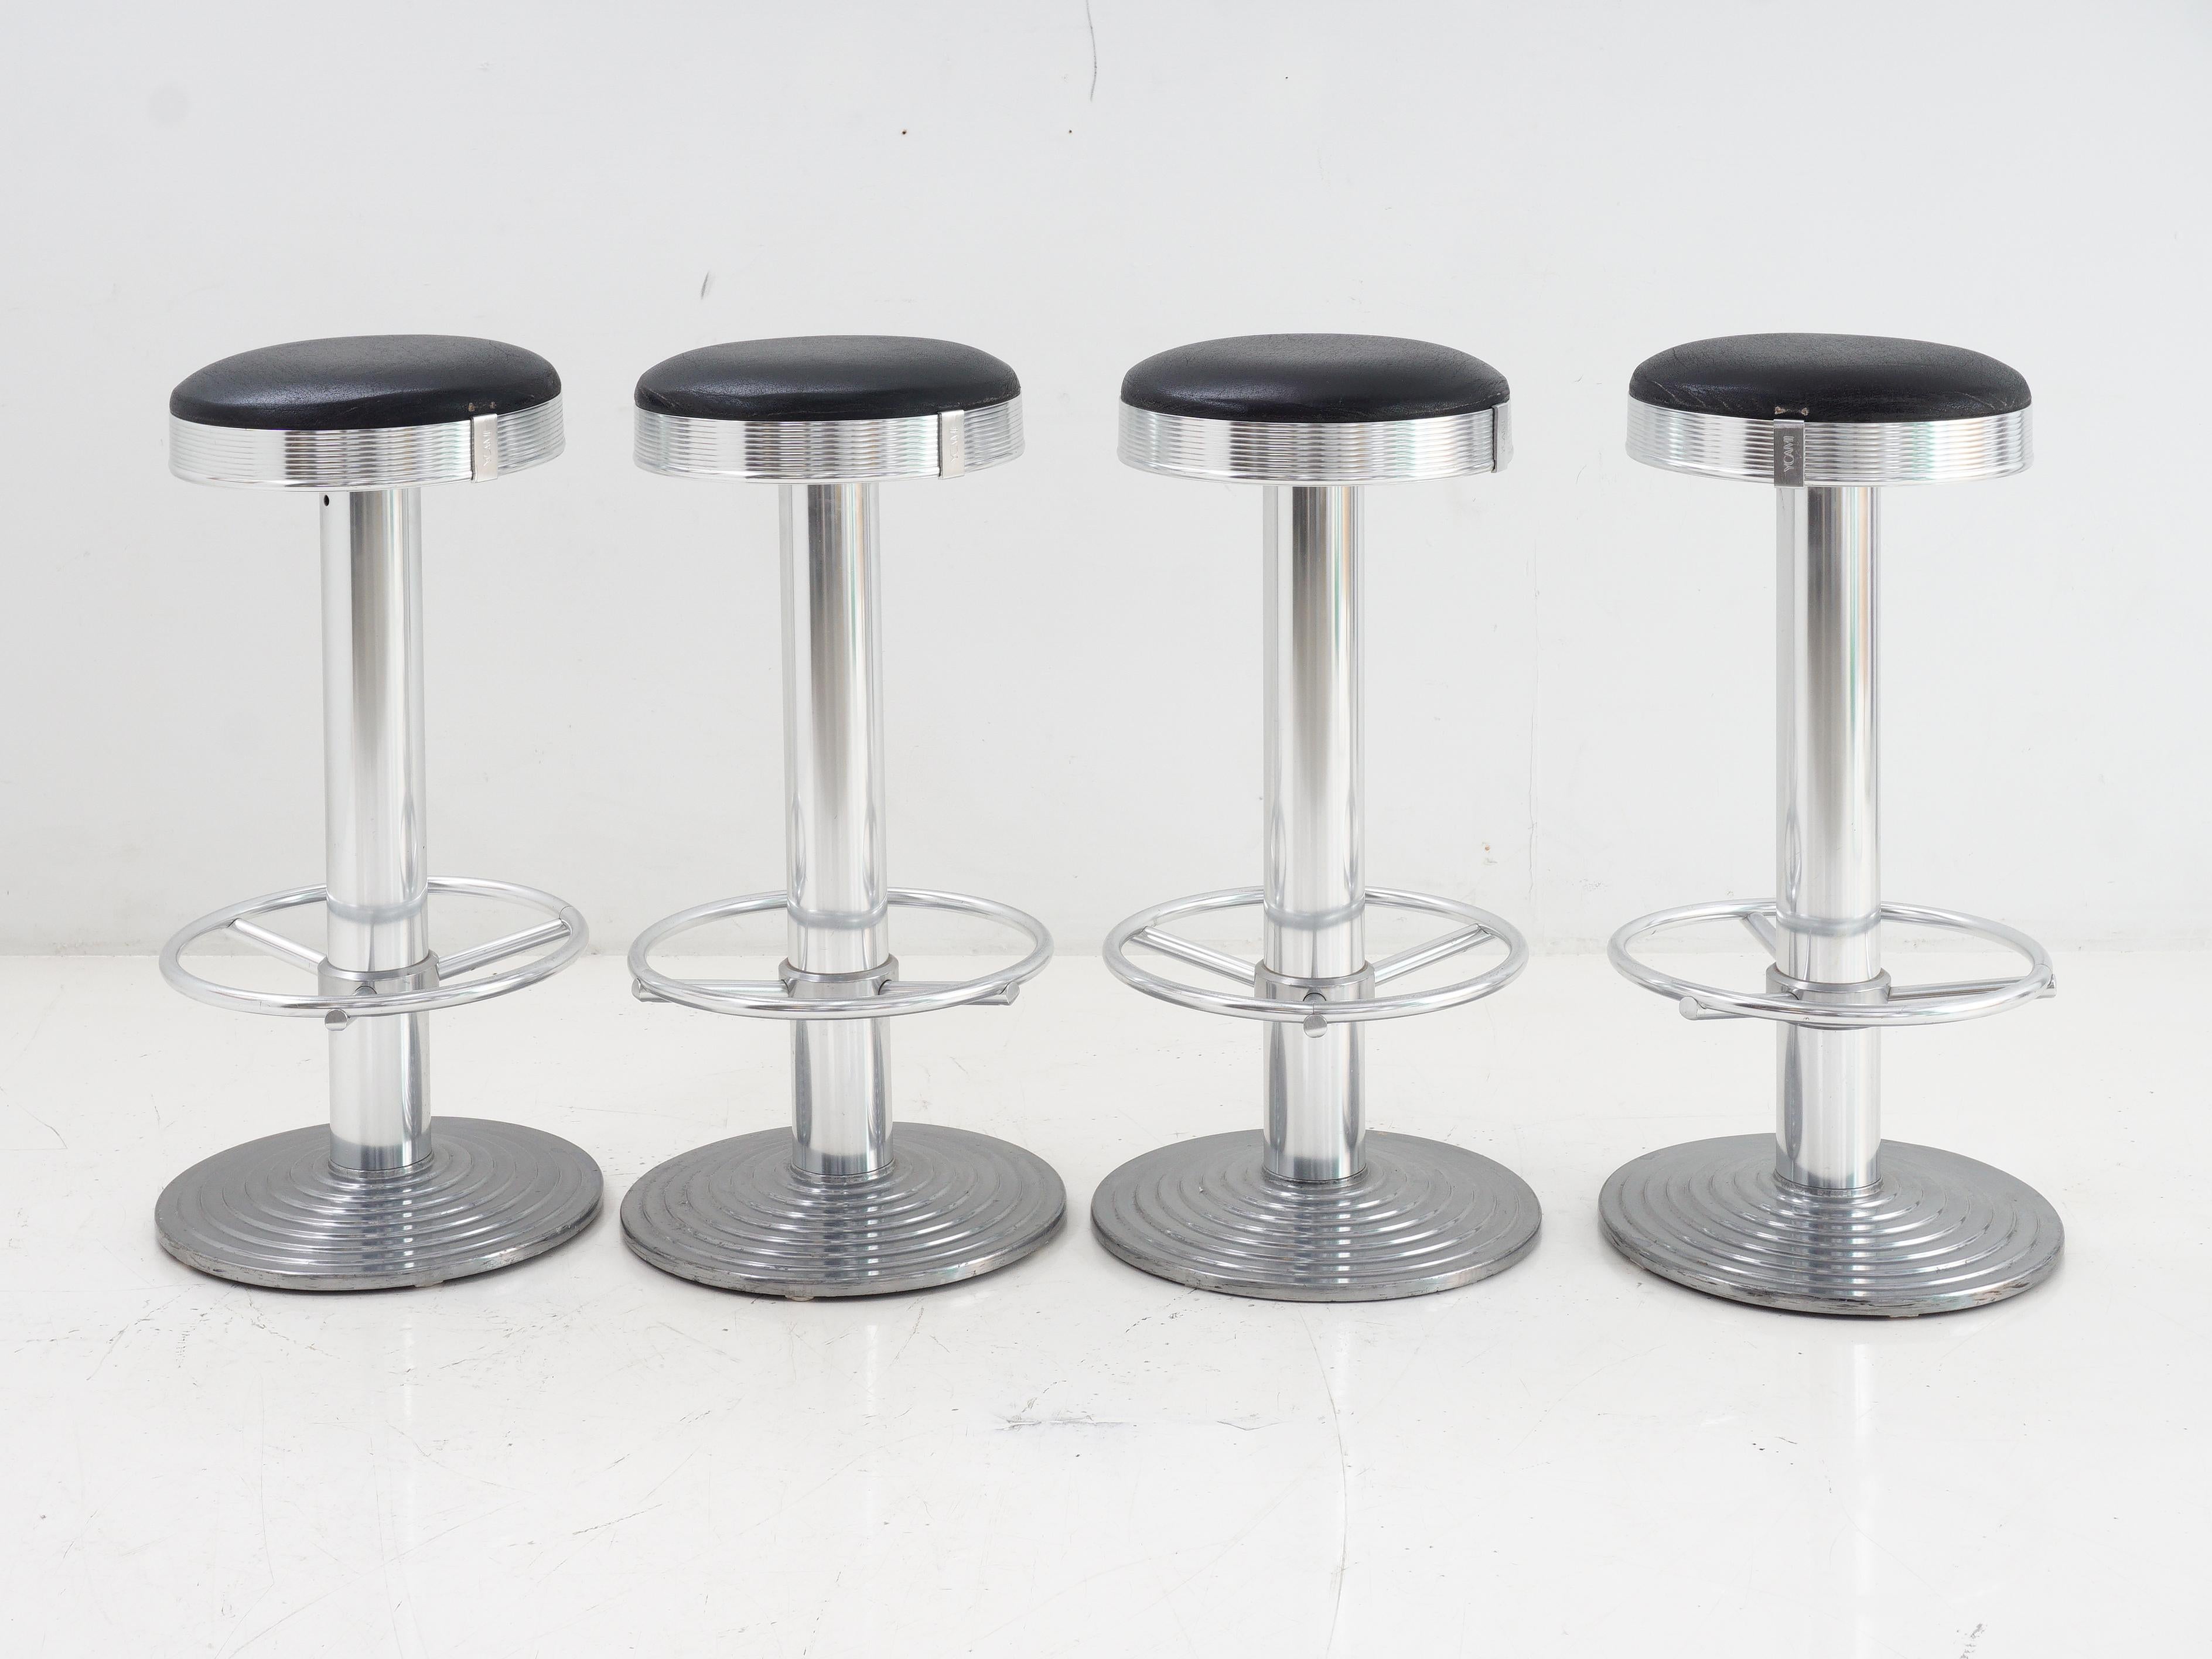 Raise the bar with these vintage Art Deco style barstools, where every seat is a work of functional art. These chrome and leather stools bring a sense of nostalgia to your modern-day gatherings. Step up your barstool game to a higher level of